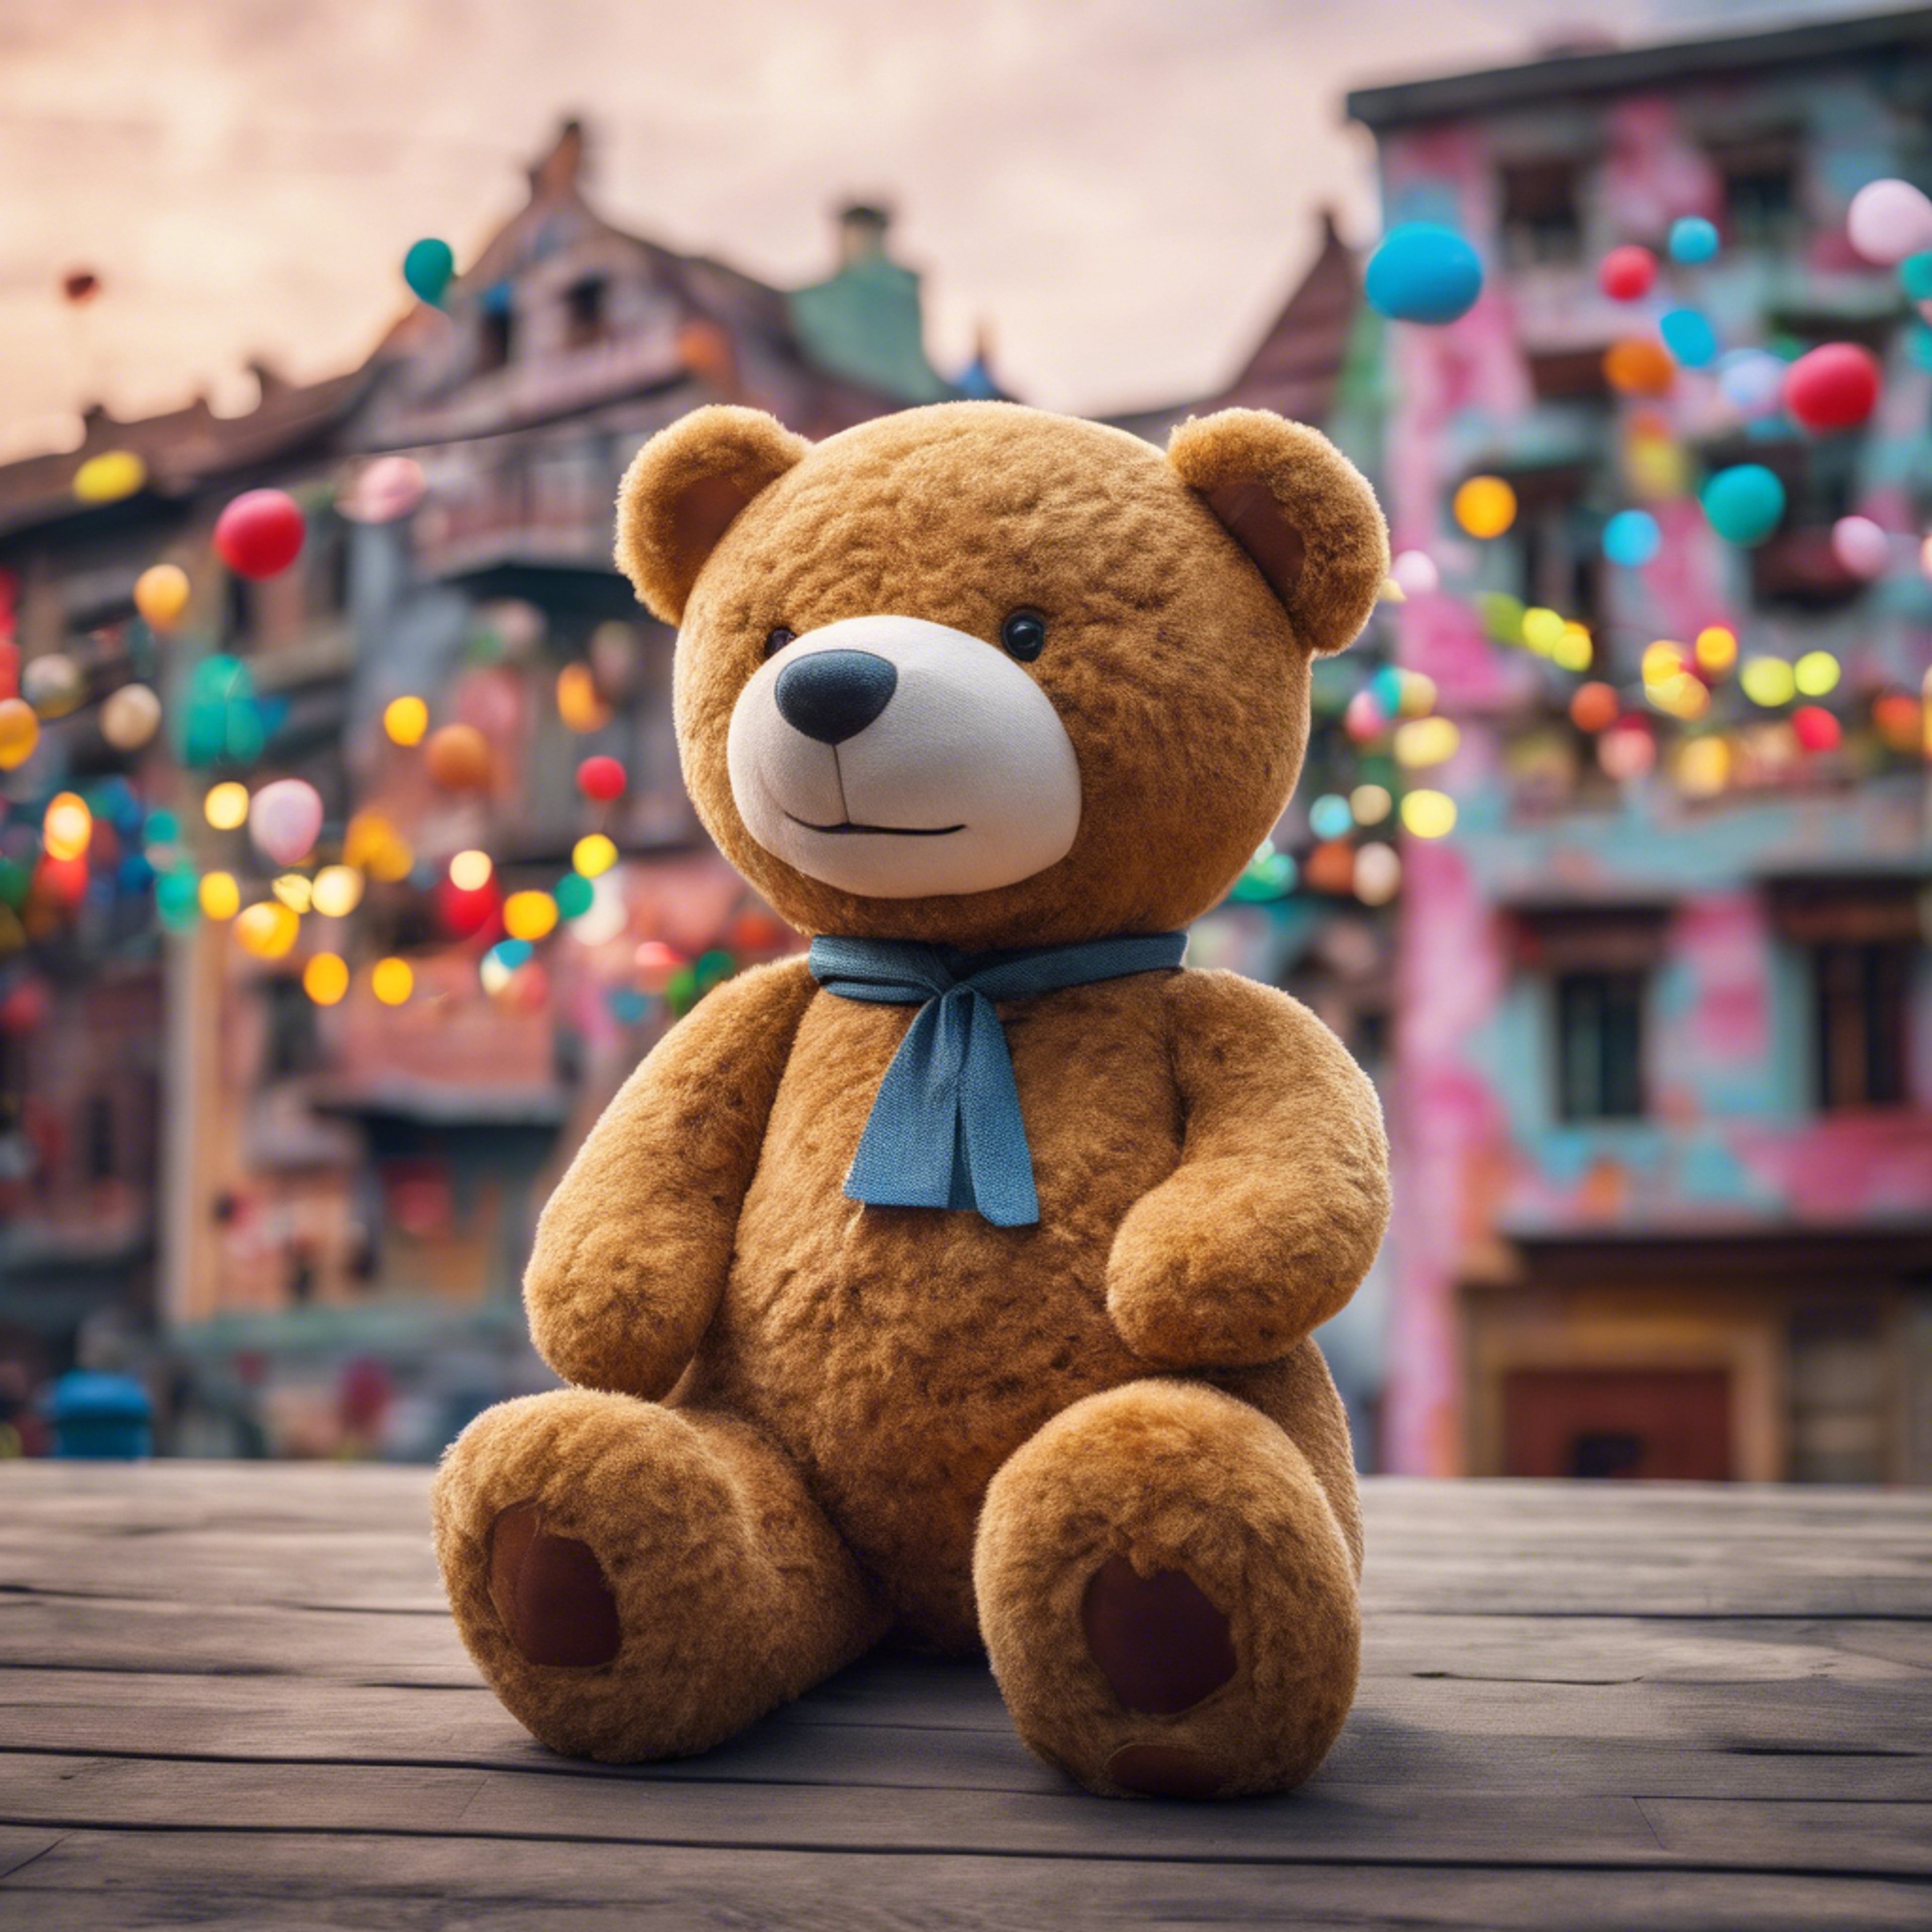 A giant teddy bear watching over a playful and colorful dream town. Kertas dinding[2720b550e885450daa82]